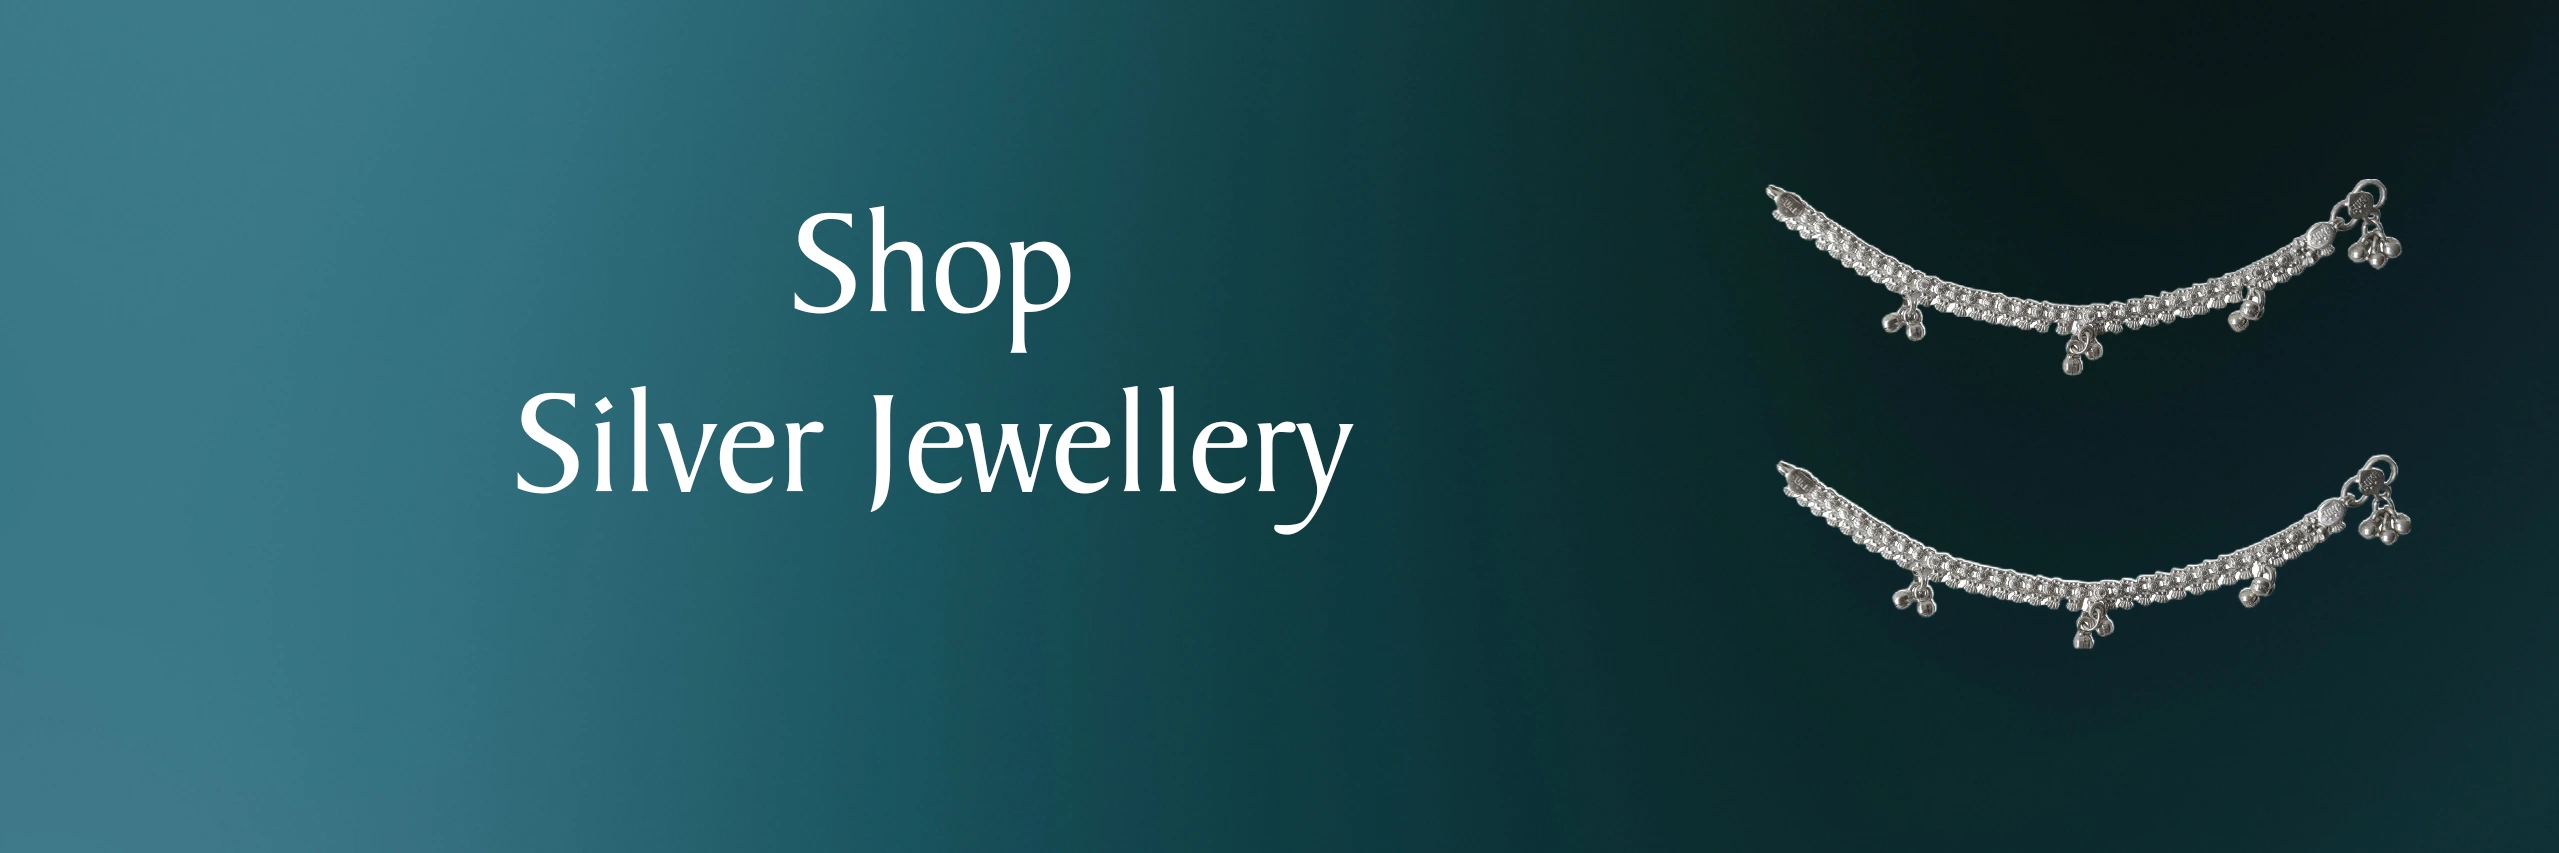 Shop Silver Jewellery With Text